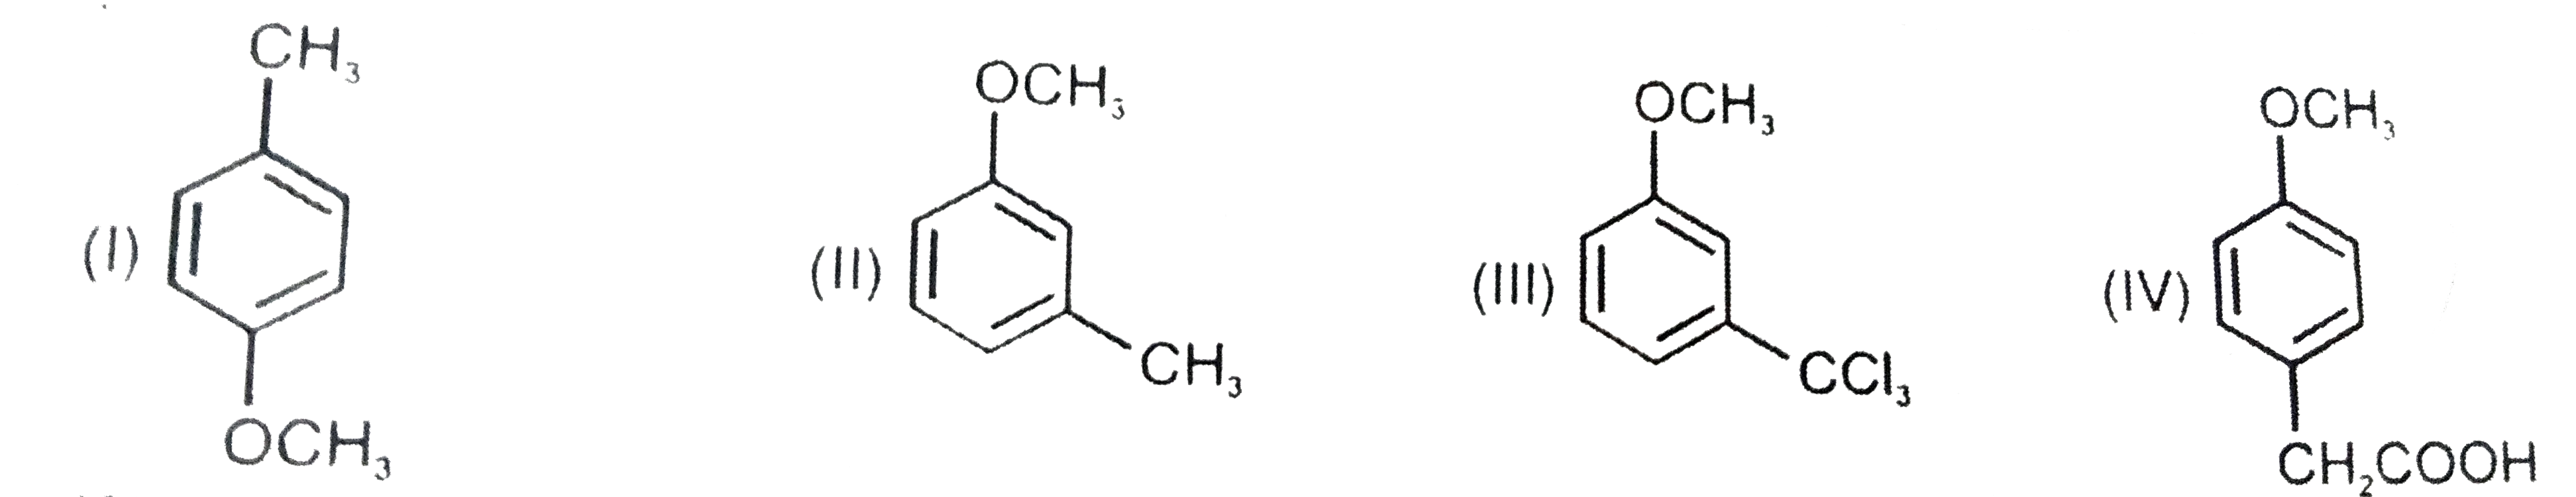 The order of reactivity of the following compounds in electrophilic monochlorinatic the most favorable position is